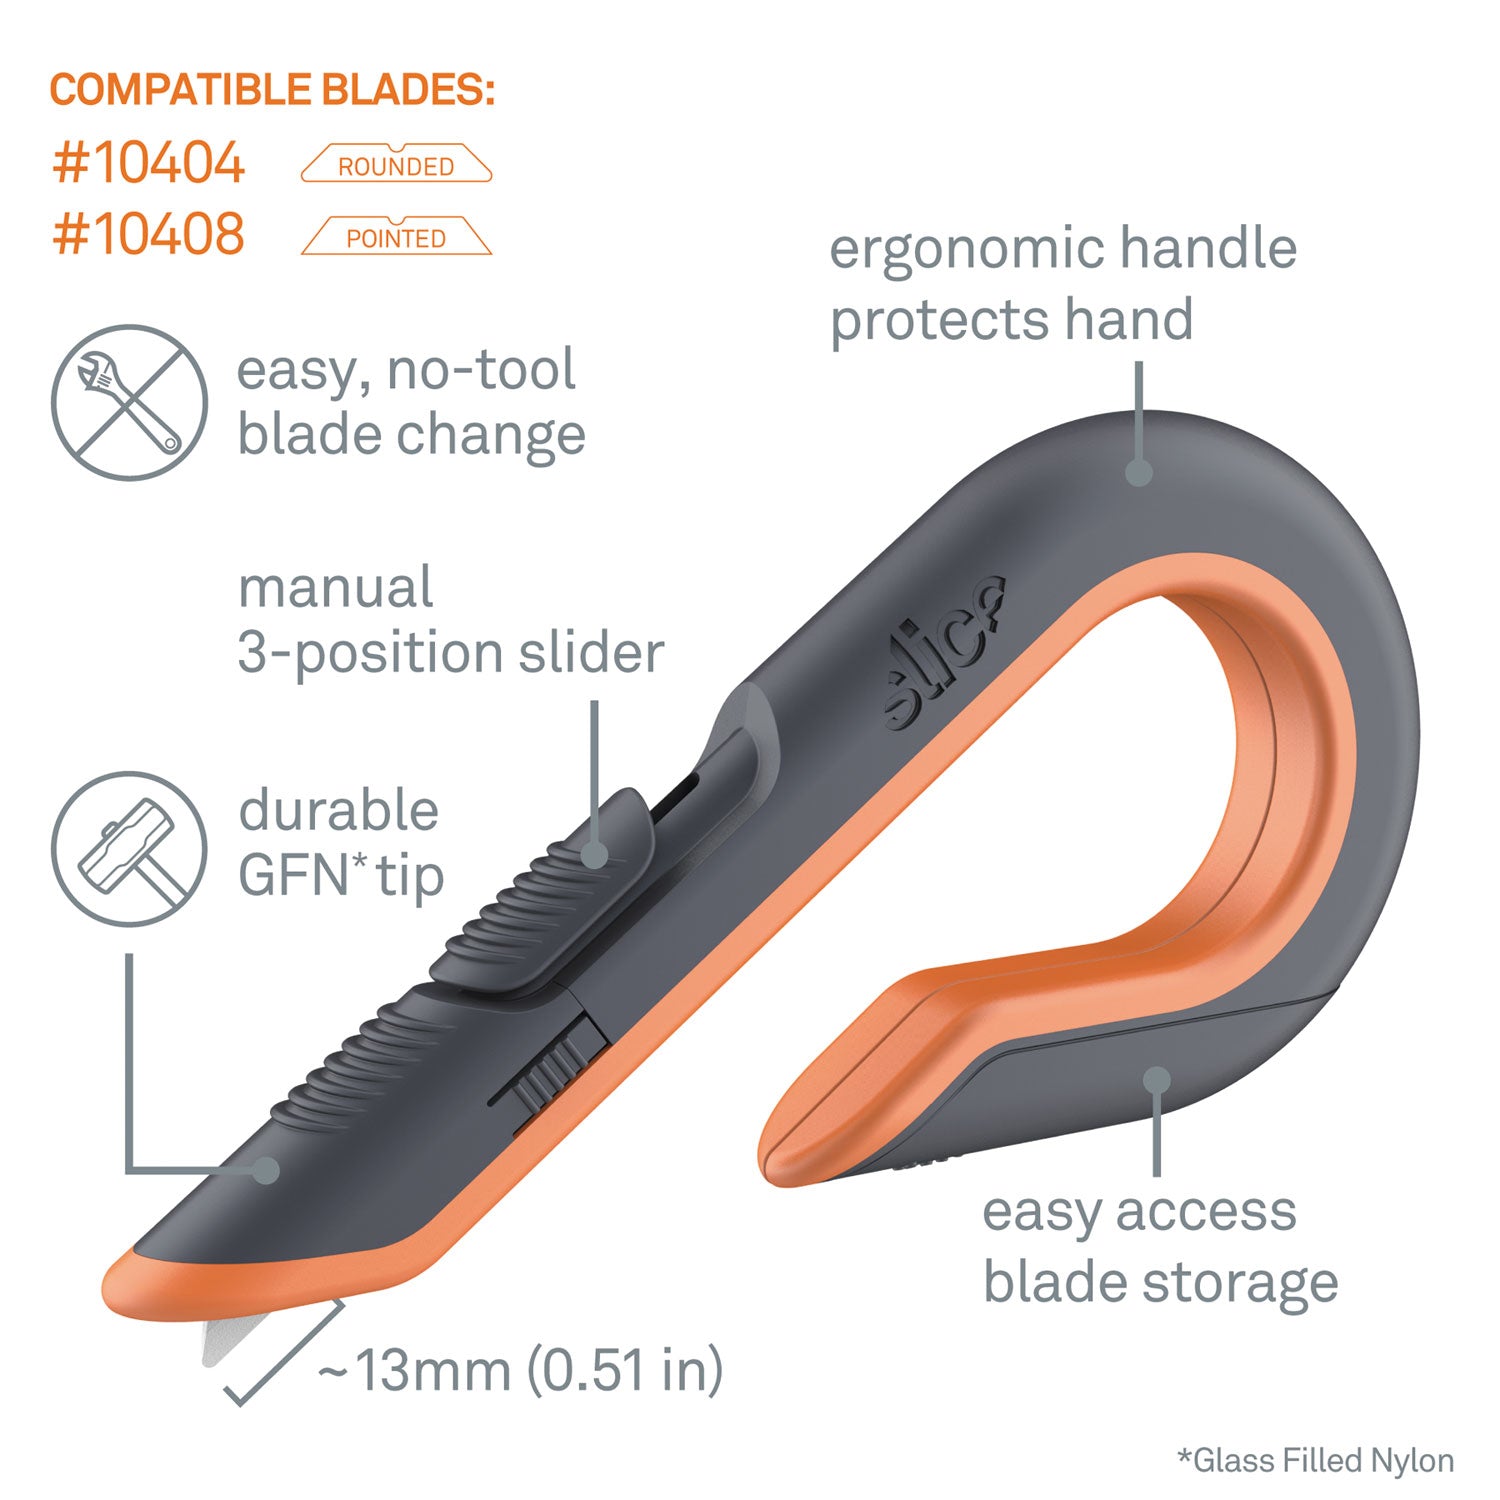 box-cutters-double-sided-replaceable-129-carbon-steel-blade-7-nylon-handle-gray-orange_sli10400 - 2